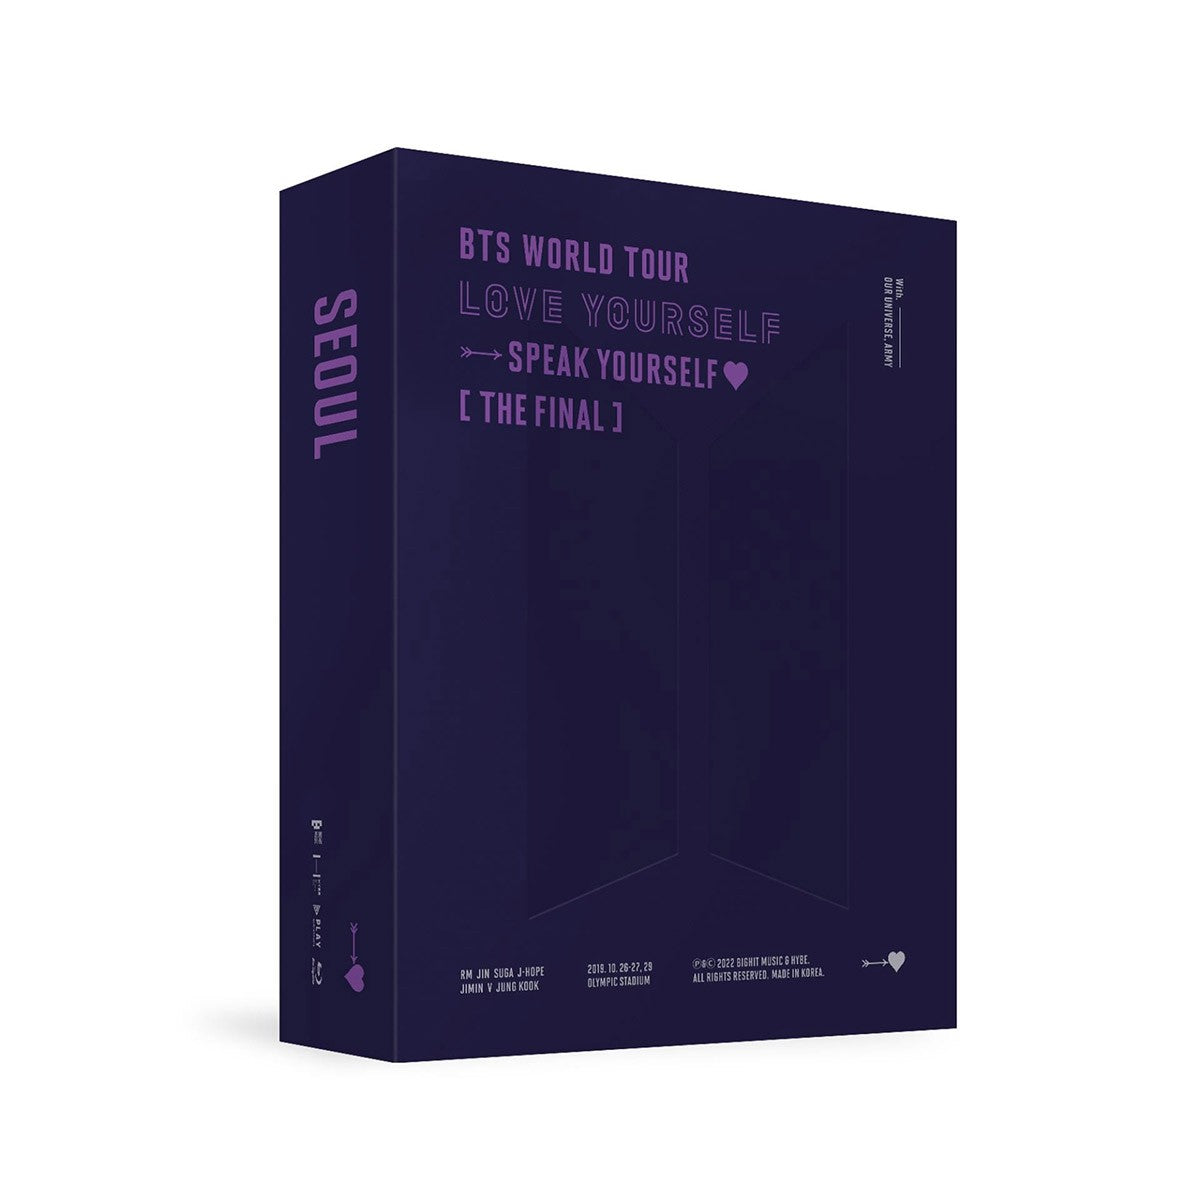 BTS WORLD TOUR 'LOVE YOURSELF : SPEAK YOURSELF' [THE